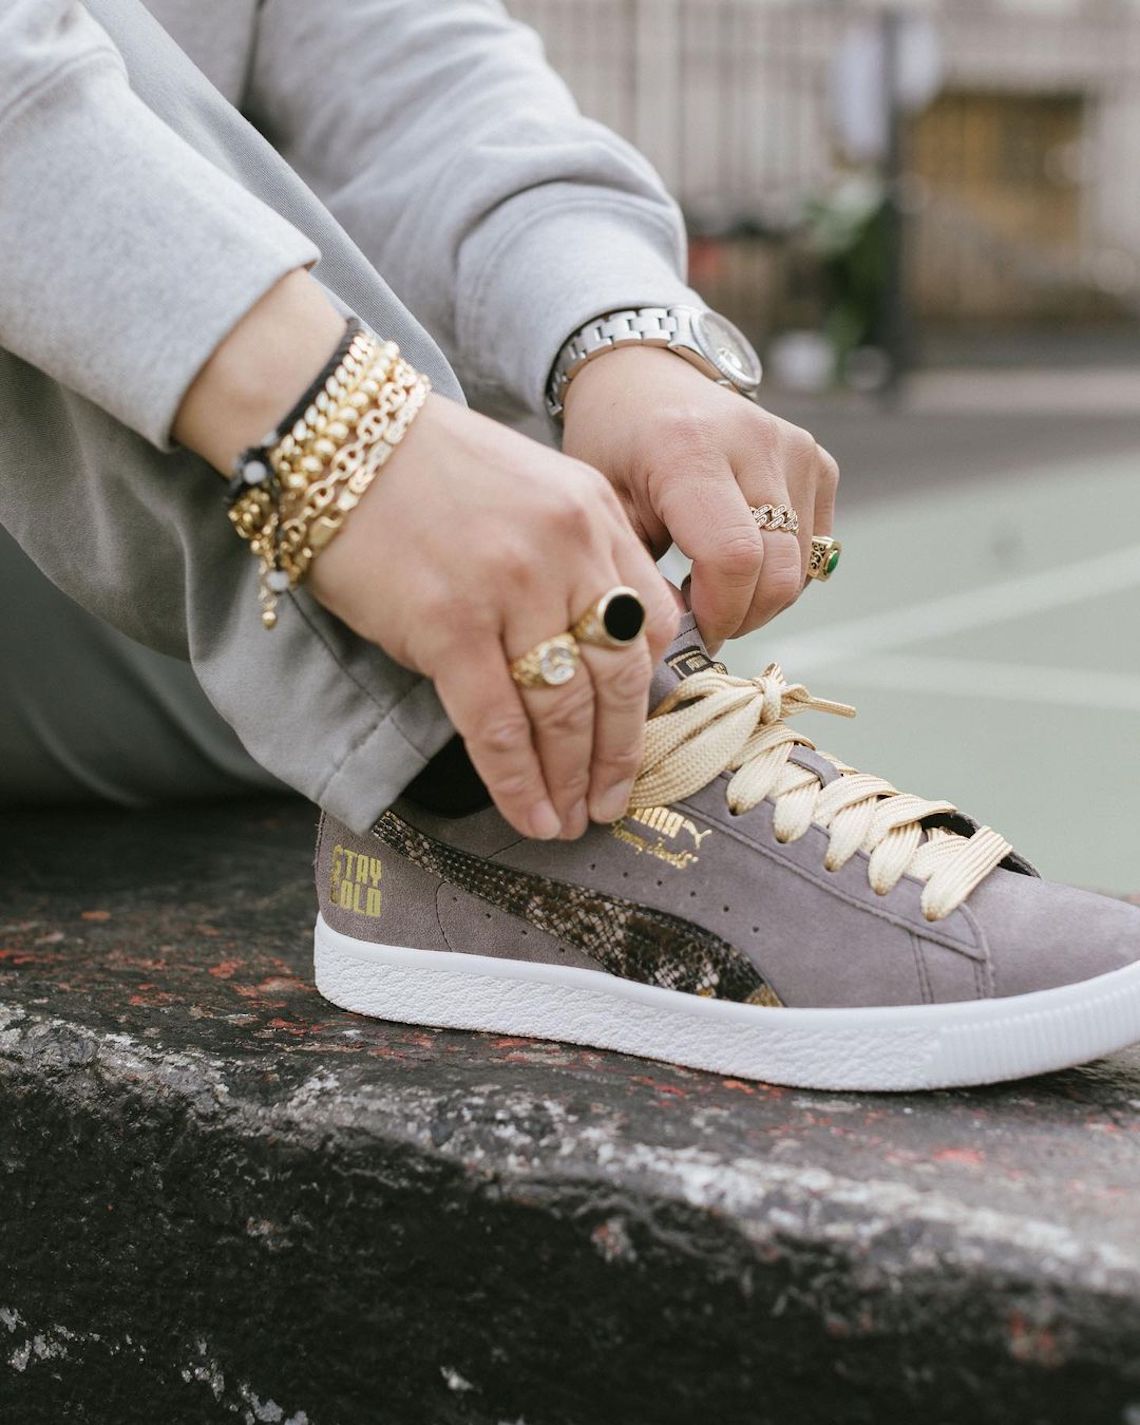 Misverstand absorptie kanaal Tommy Jewels x PUMA Clyde "Stay Gold" Release | SneakerNews.com